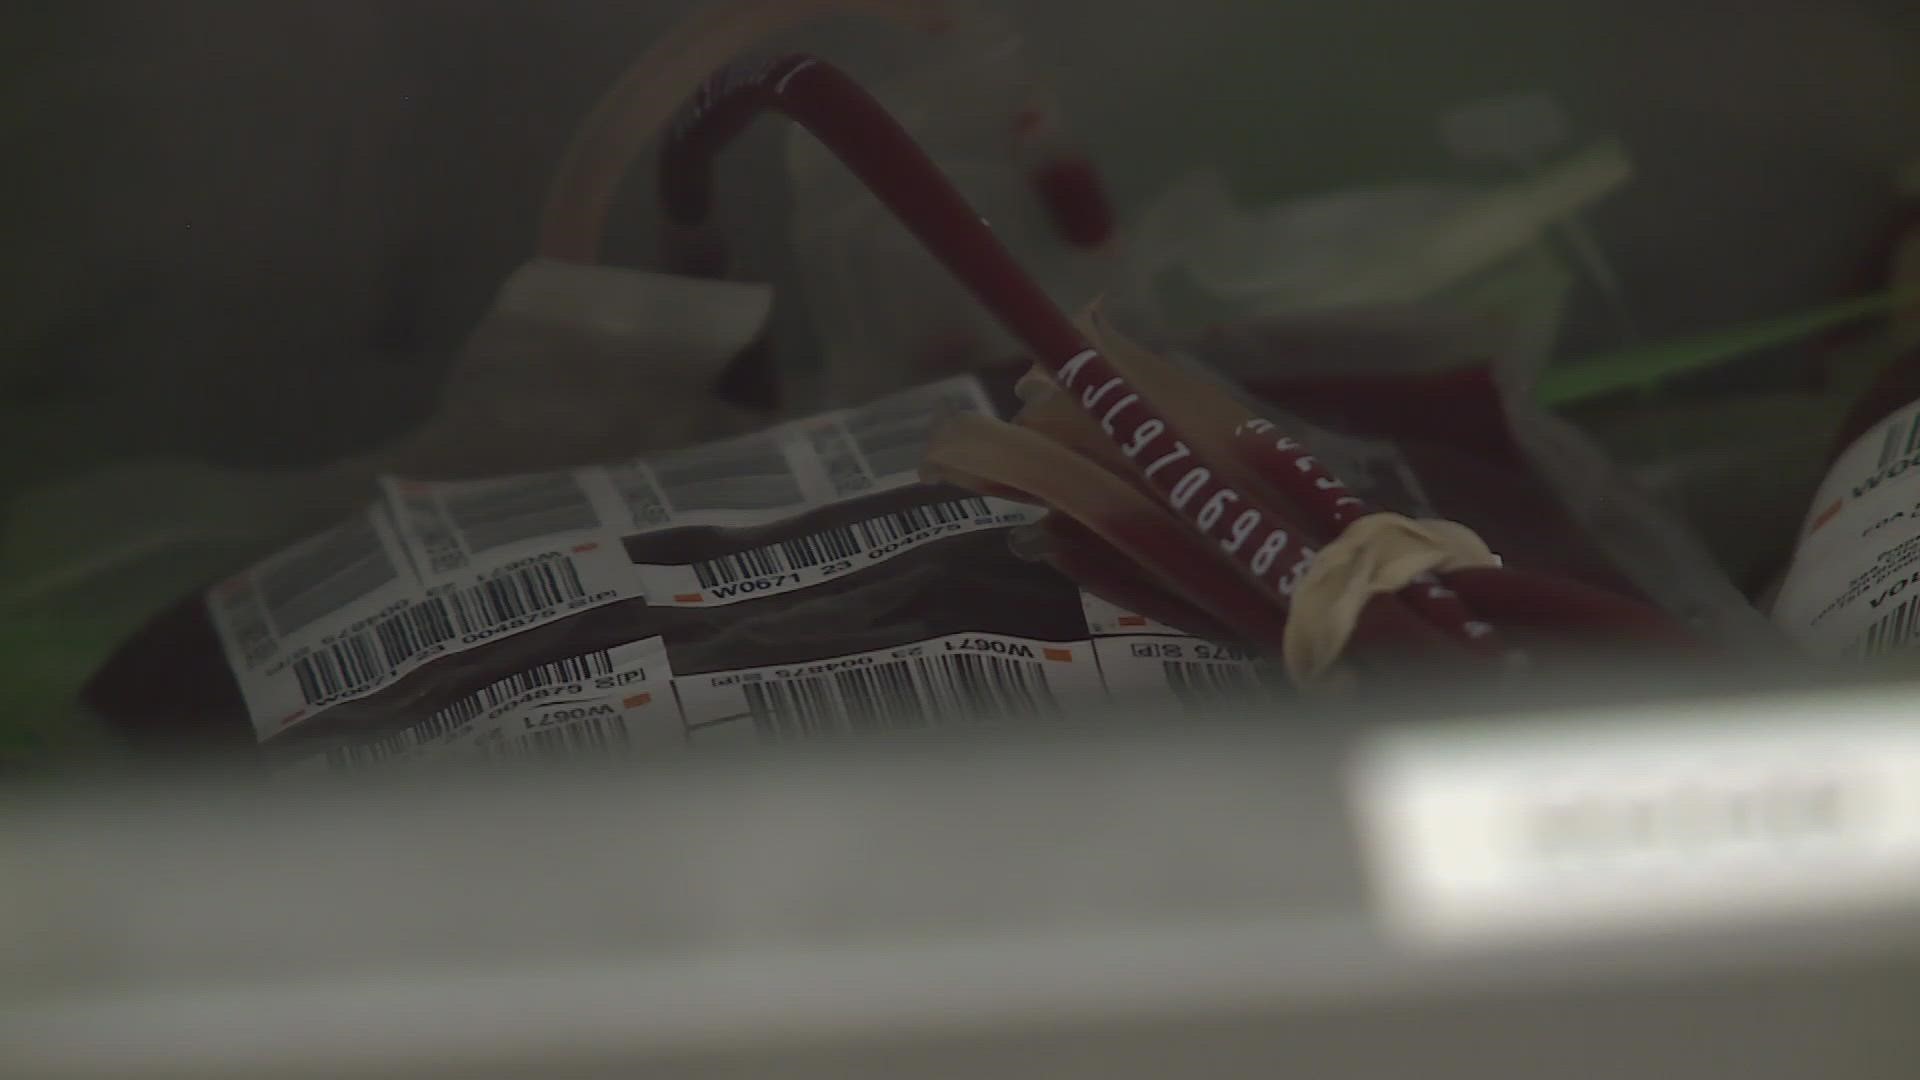 NOEMS has performed about 126 blood transfusions in the field since the start of the program in October 2021.